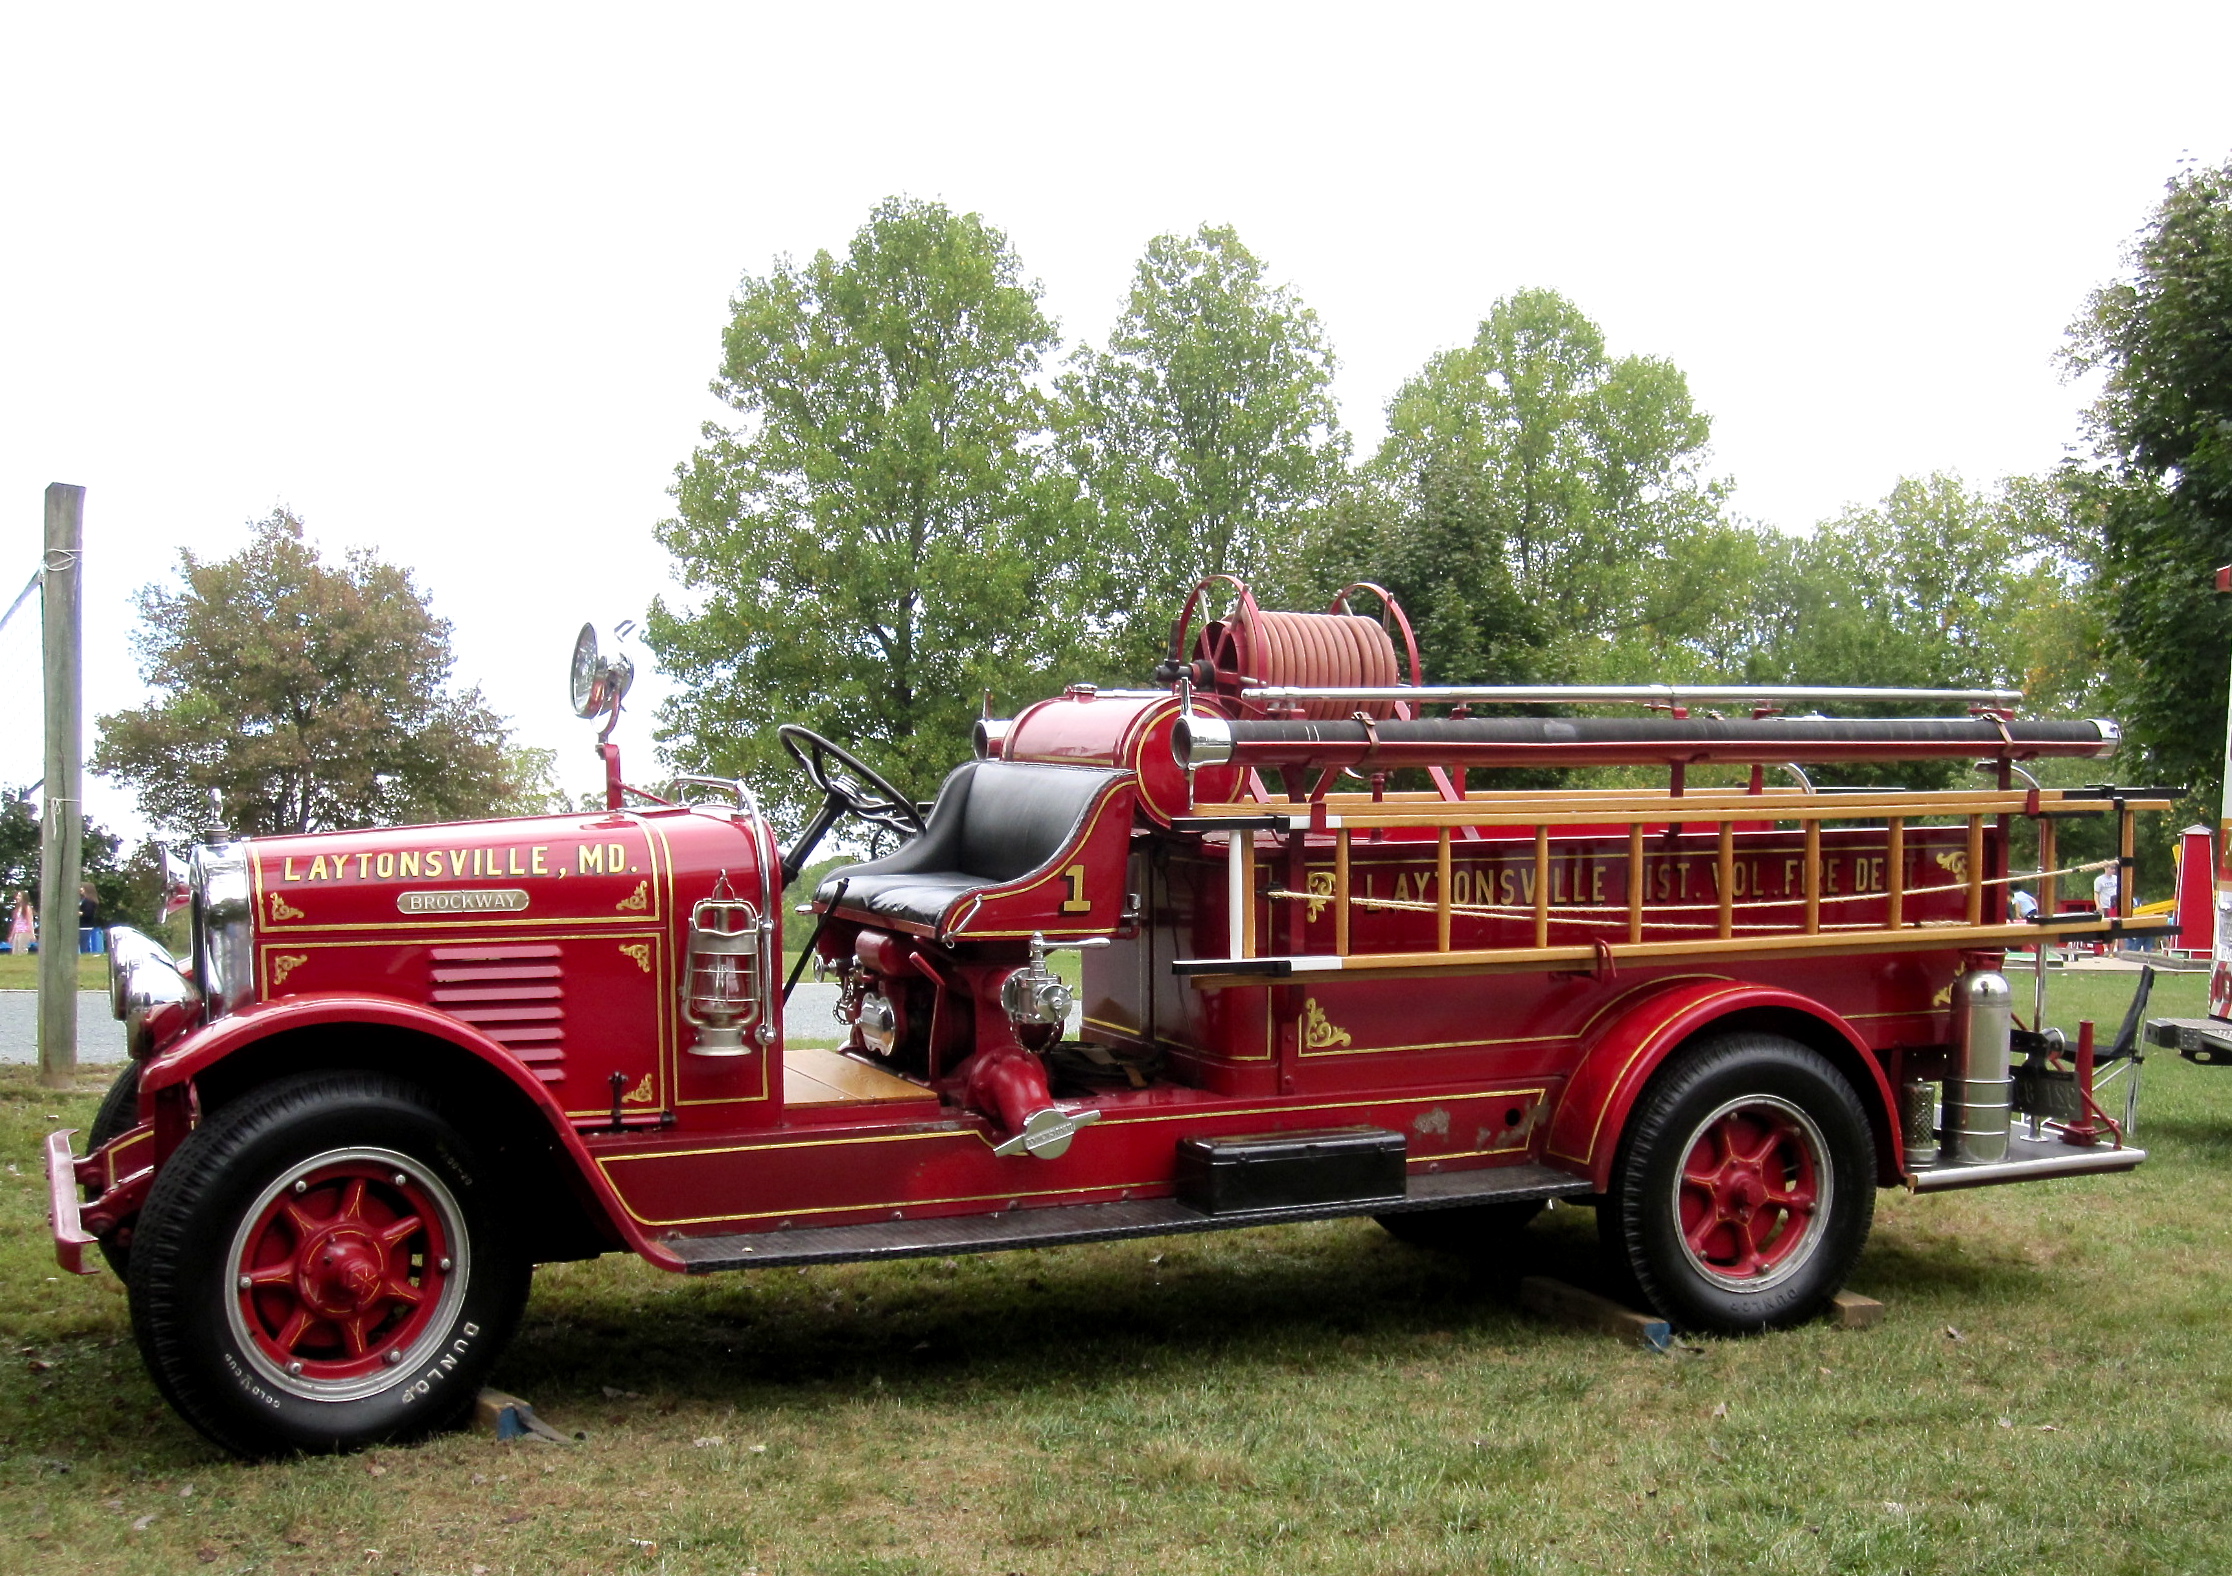 a red fire truck parked in the grass